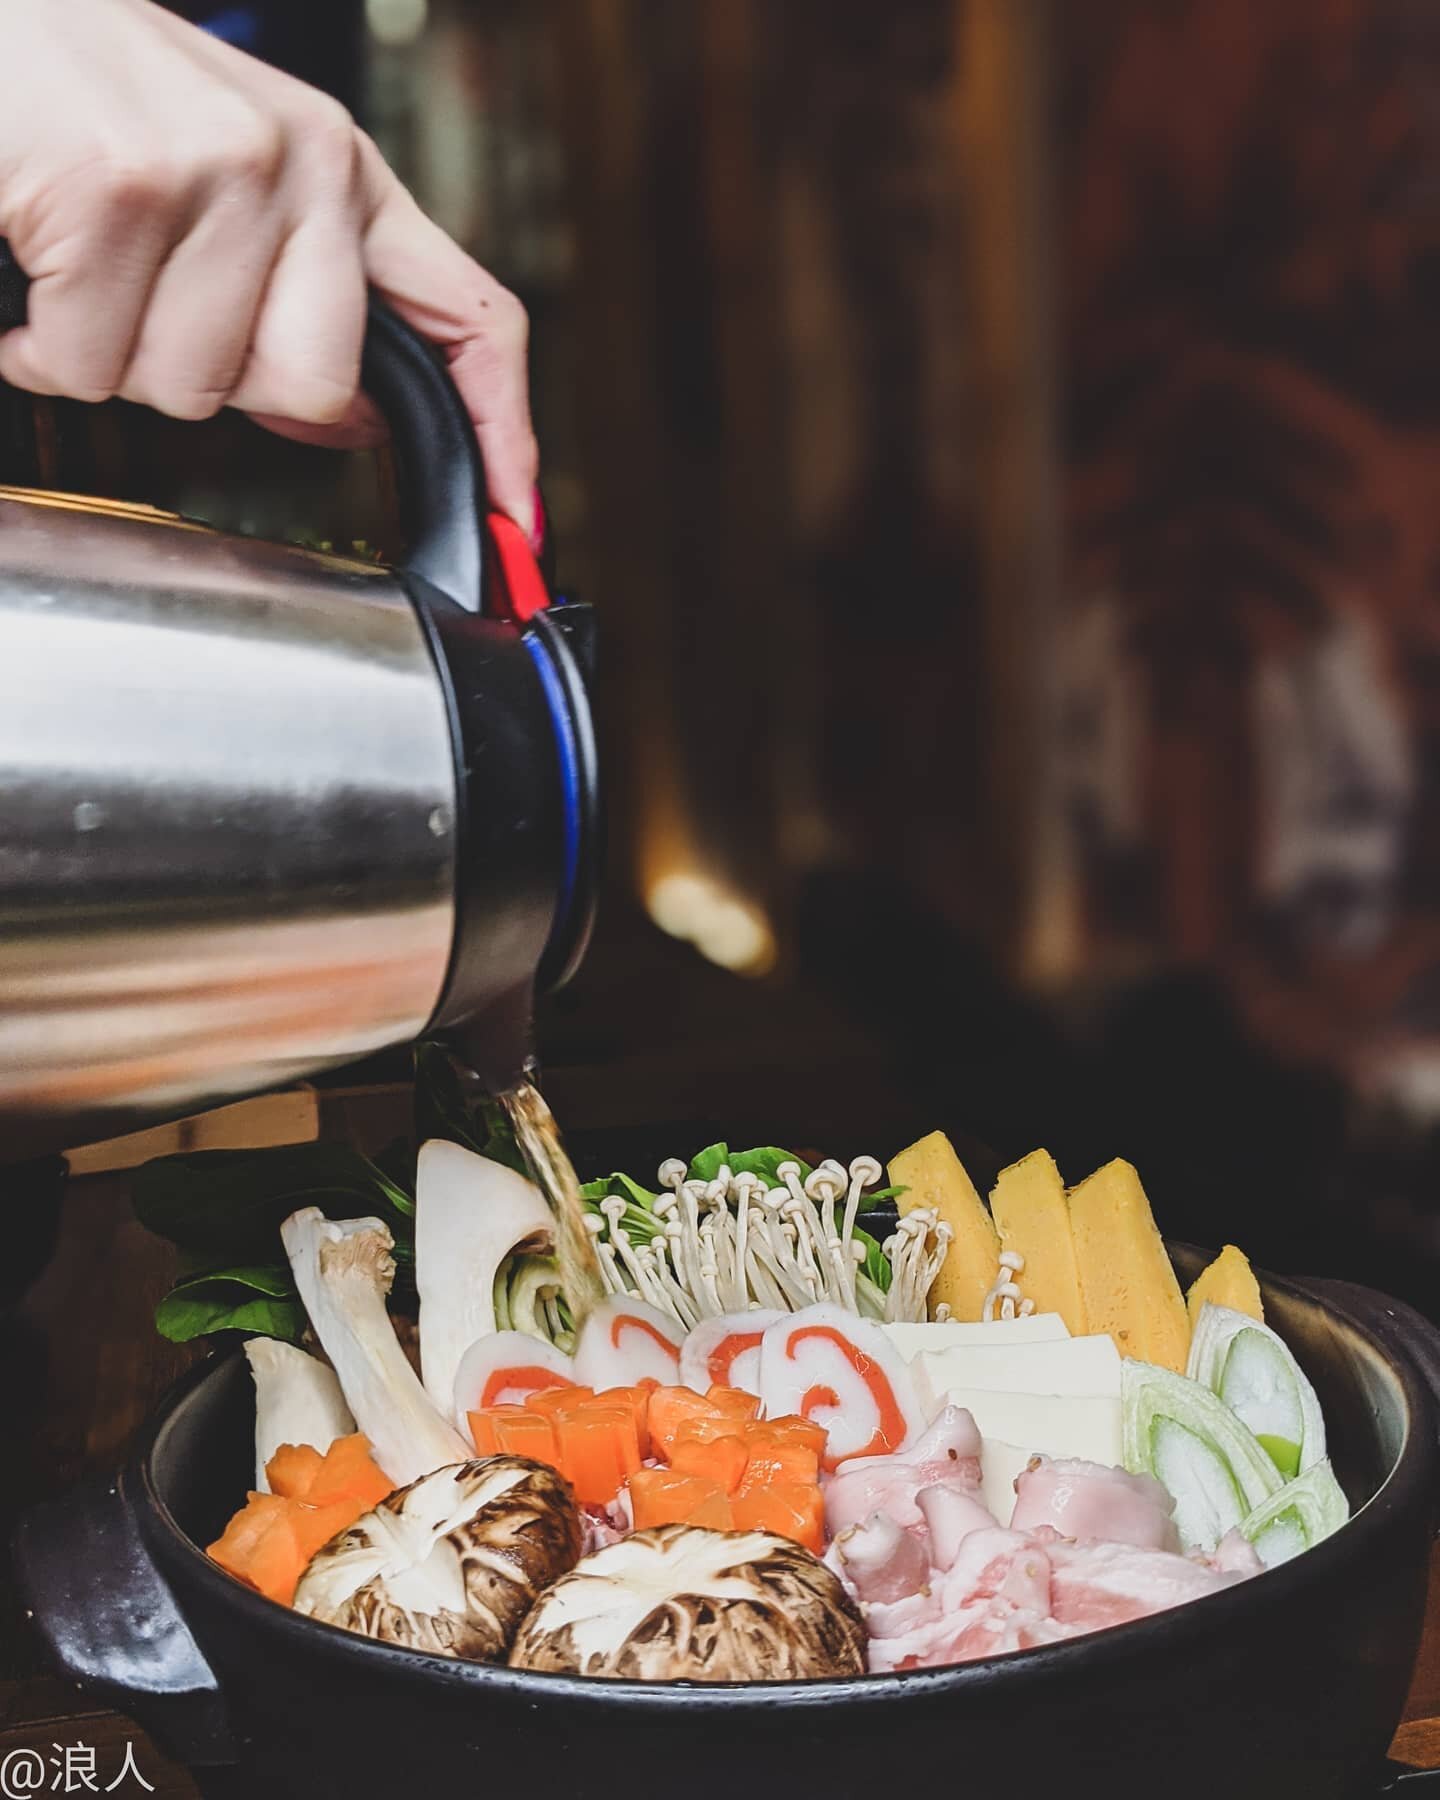 September means fall season coming🍁
Chanko Nabe is now on this week's Chef's Daily!
Chicken/Pork/Seafood options available! 
Also, you may now order your food to your doorstep on our website too!
Stay tuned for more great news and deals!
➡️For our m